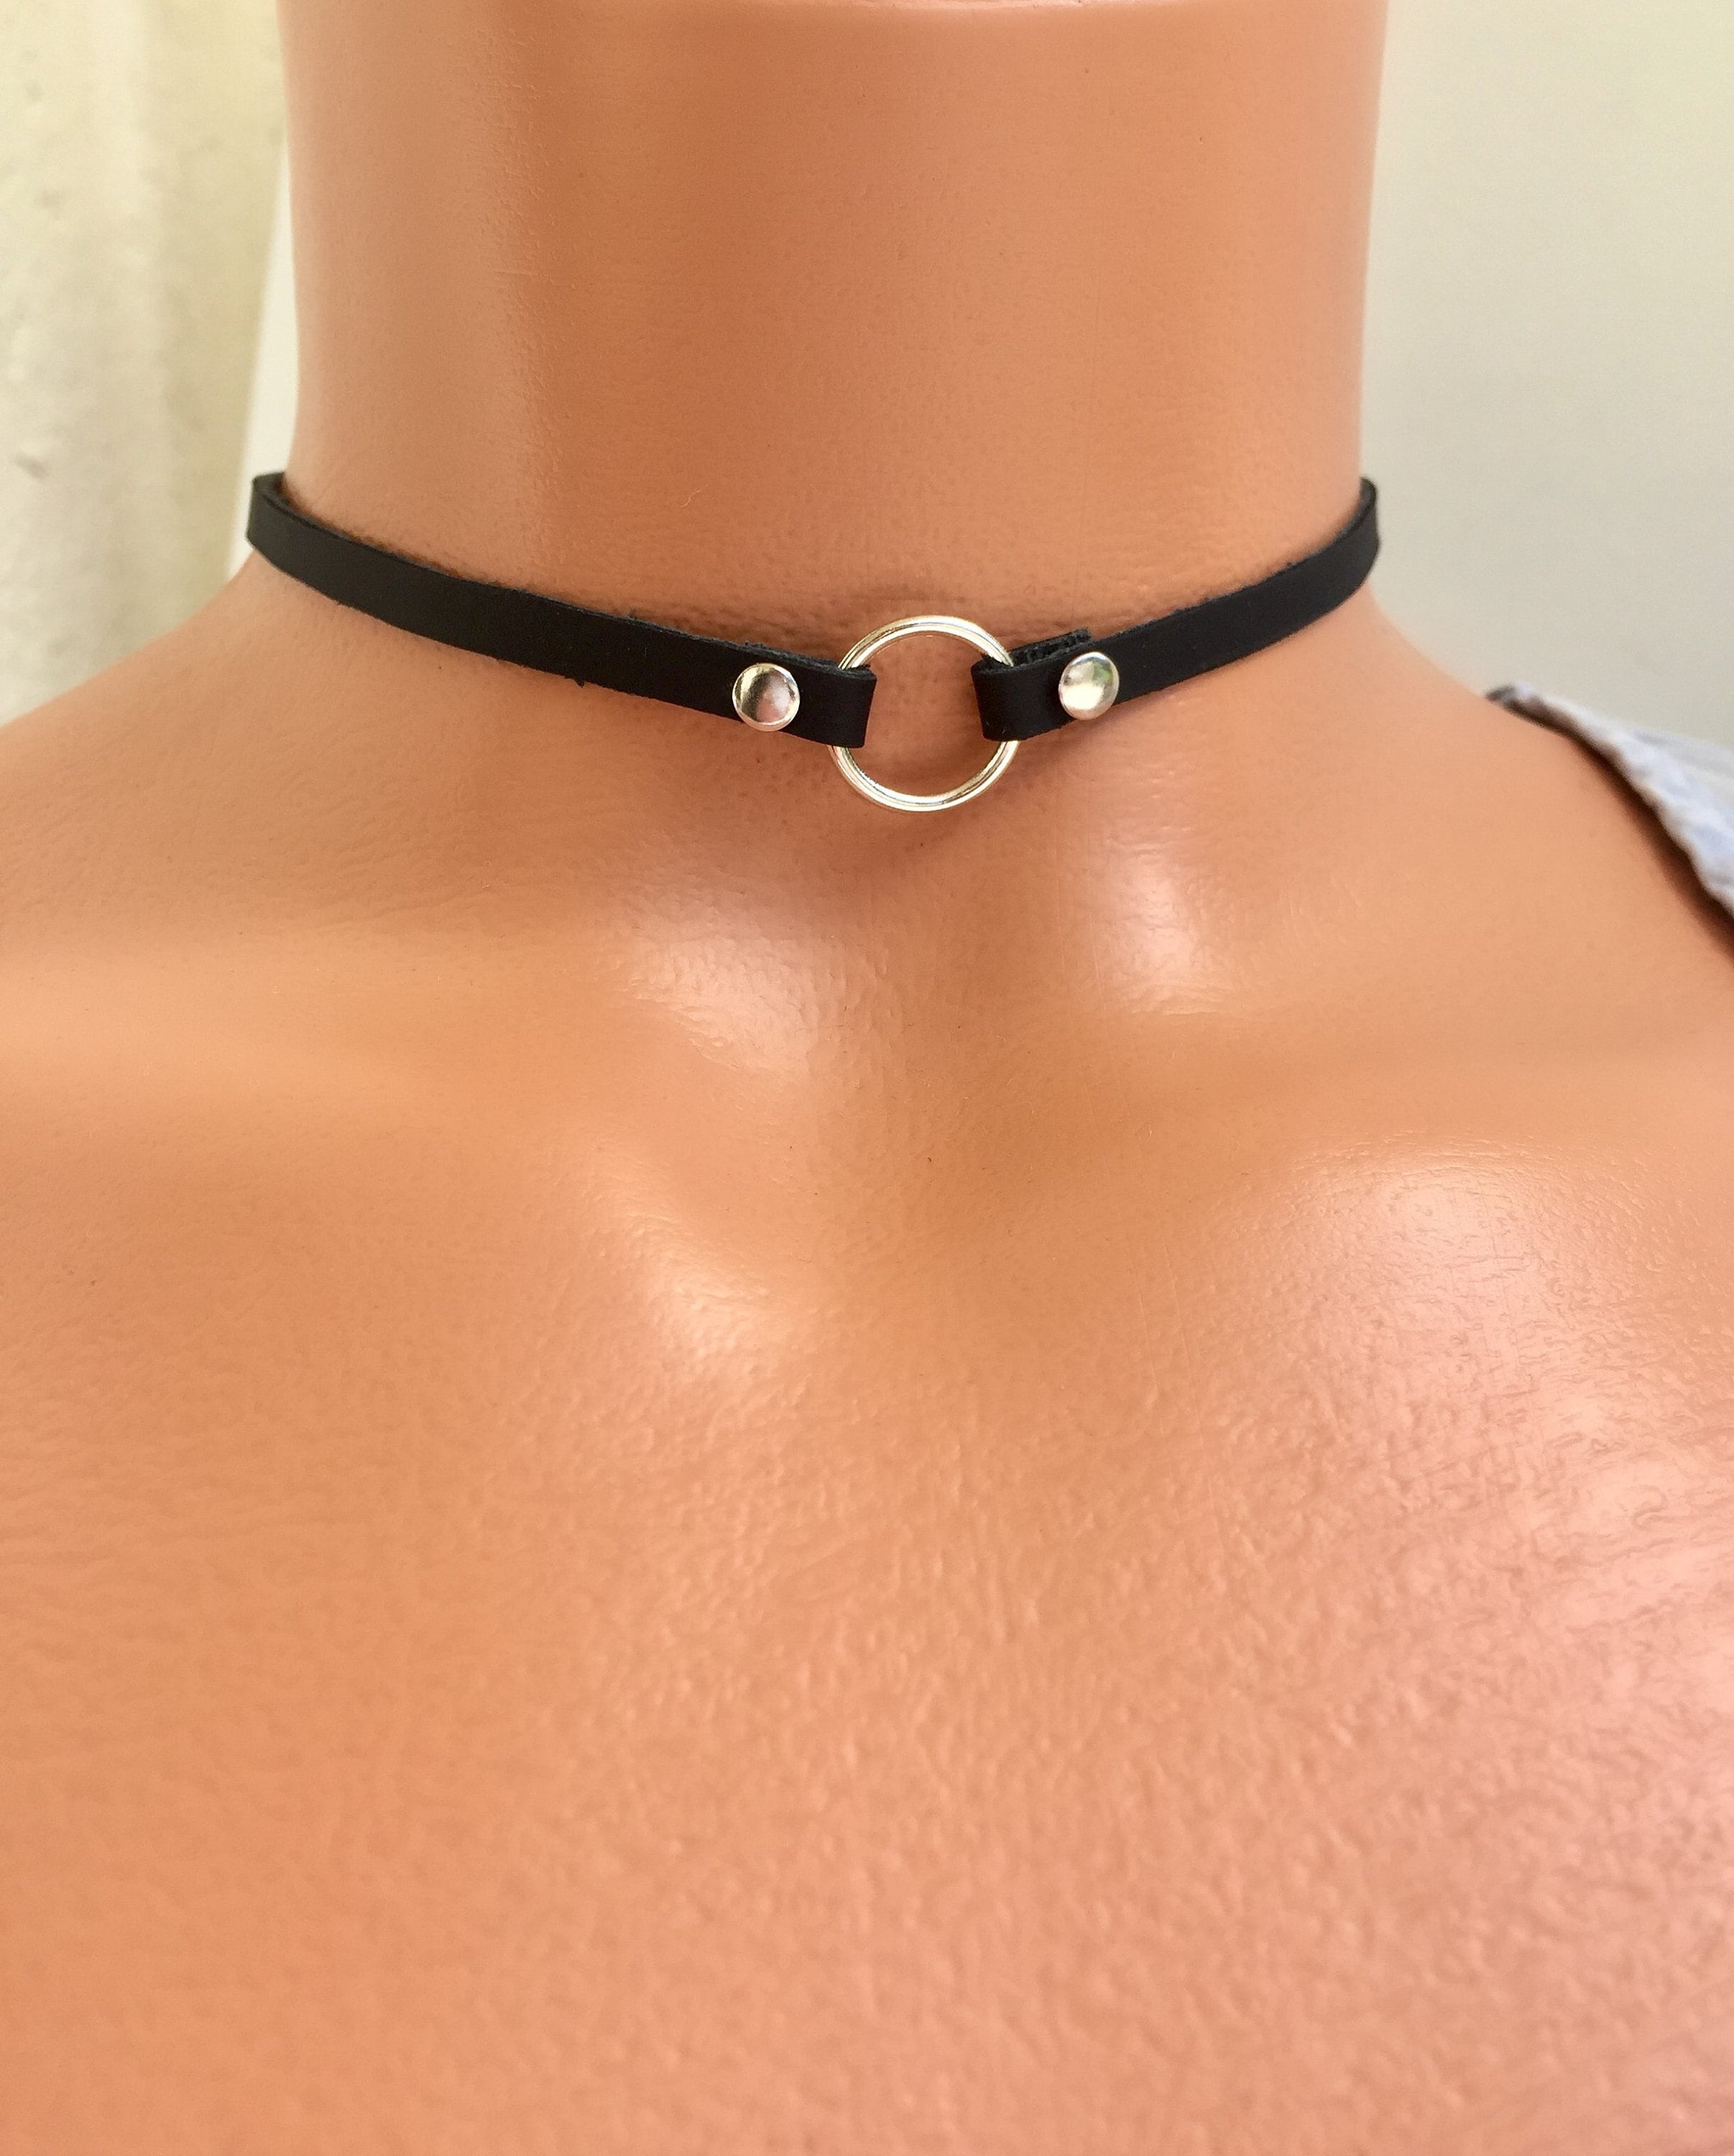 Personalized Leather Choker Necklace Black Choker Collar Layered Choker  Leather Chokers for Women, Bridesmaid Gift Ideas,birthday Gift 